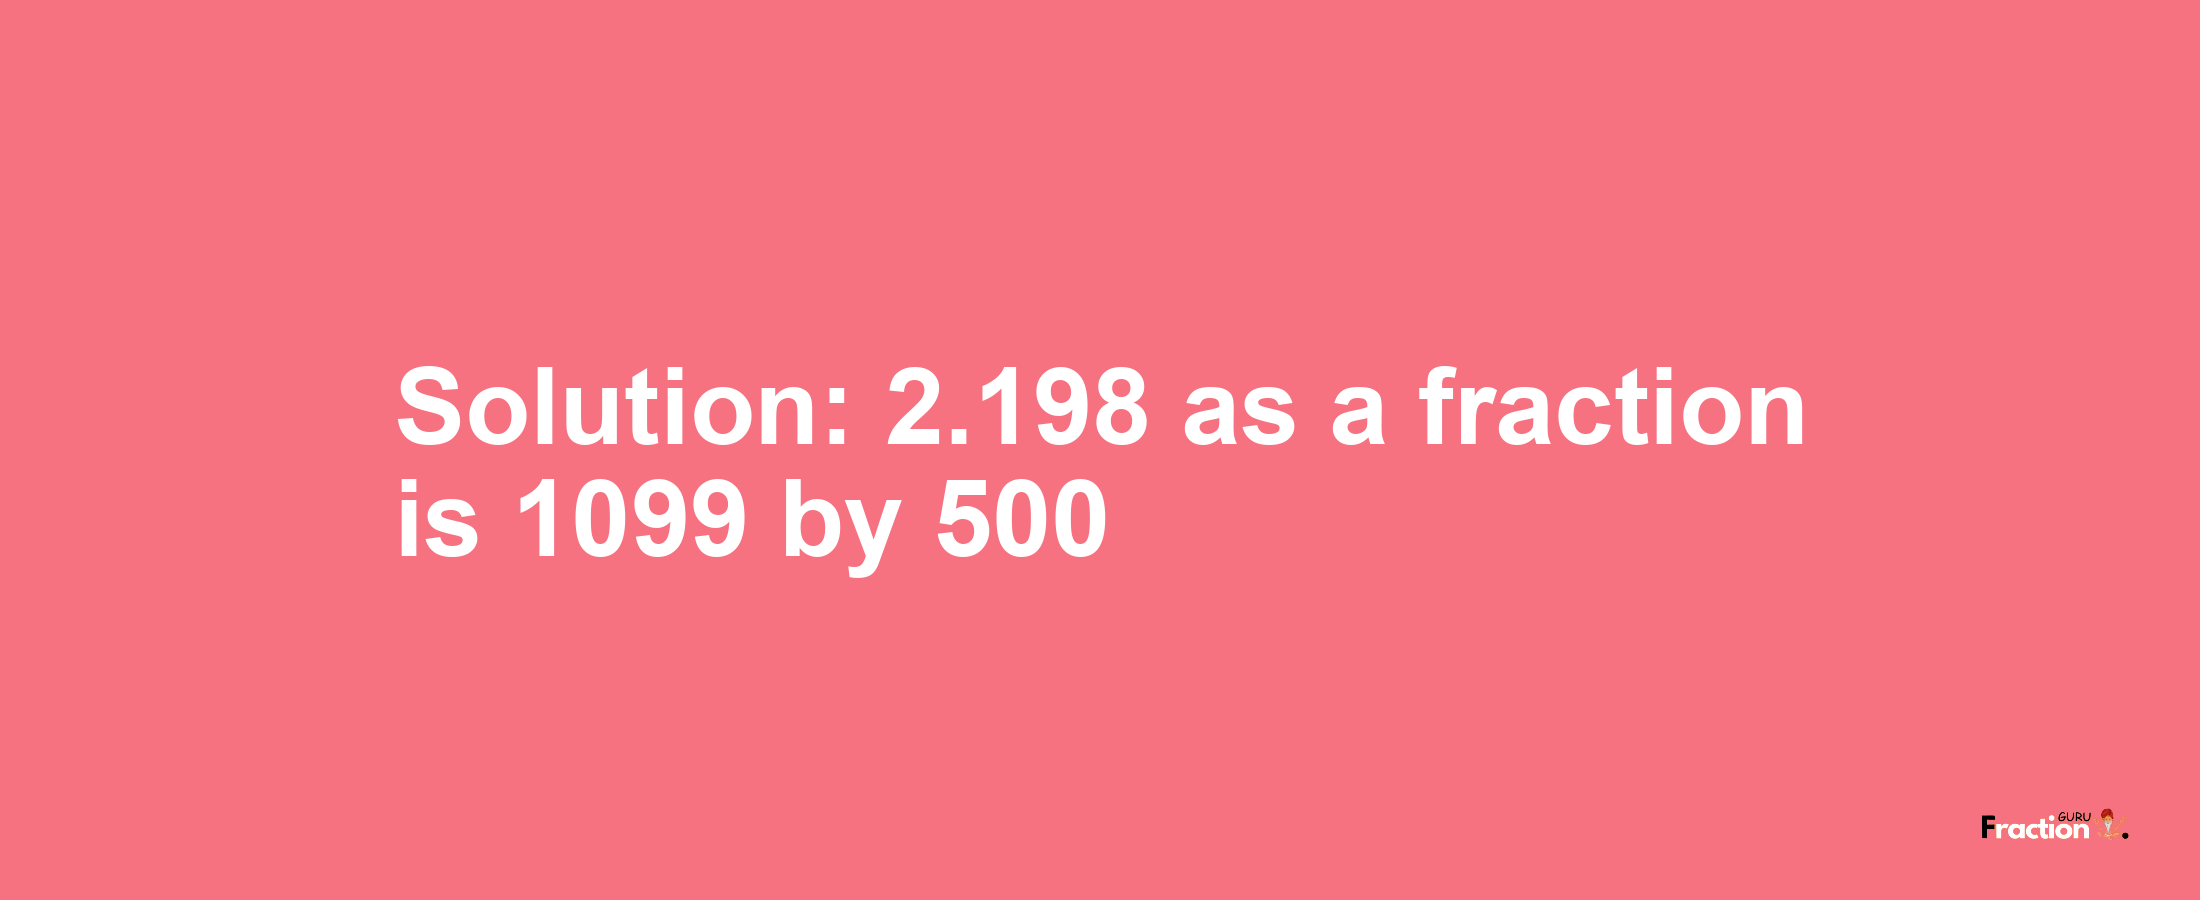 Solution:2.198 as a fraction is 1099/500